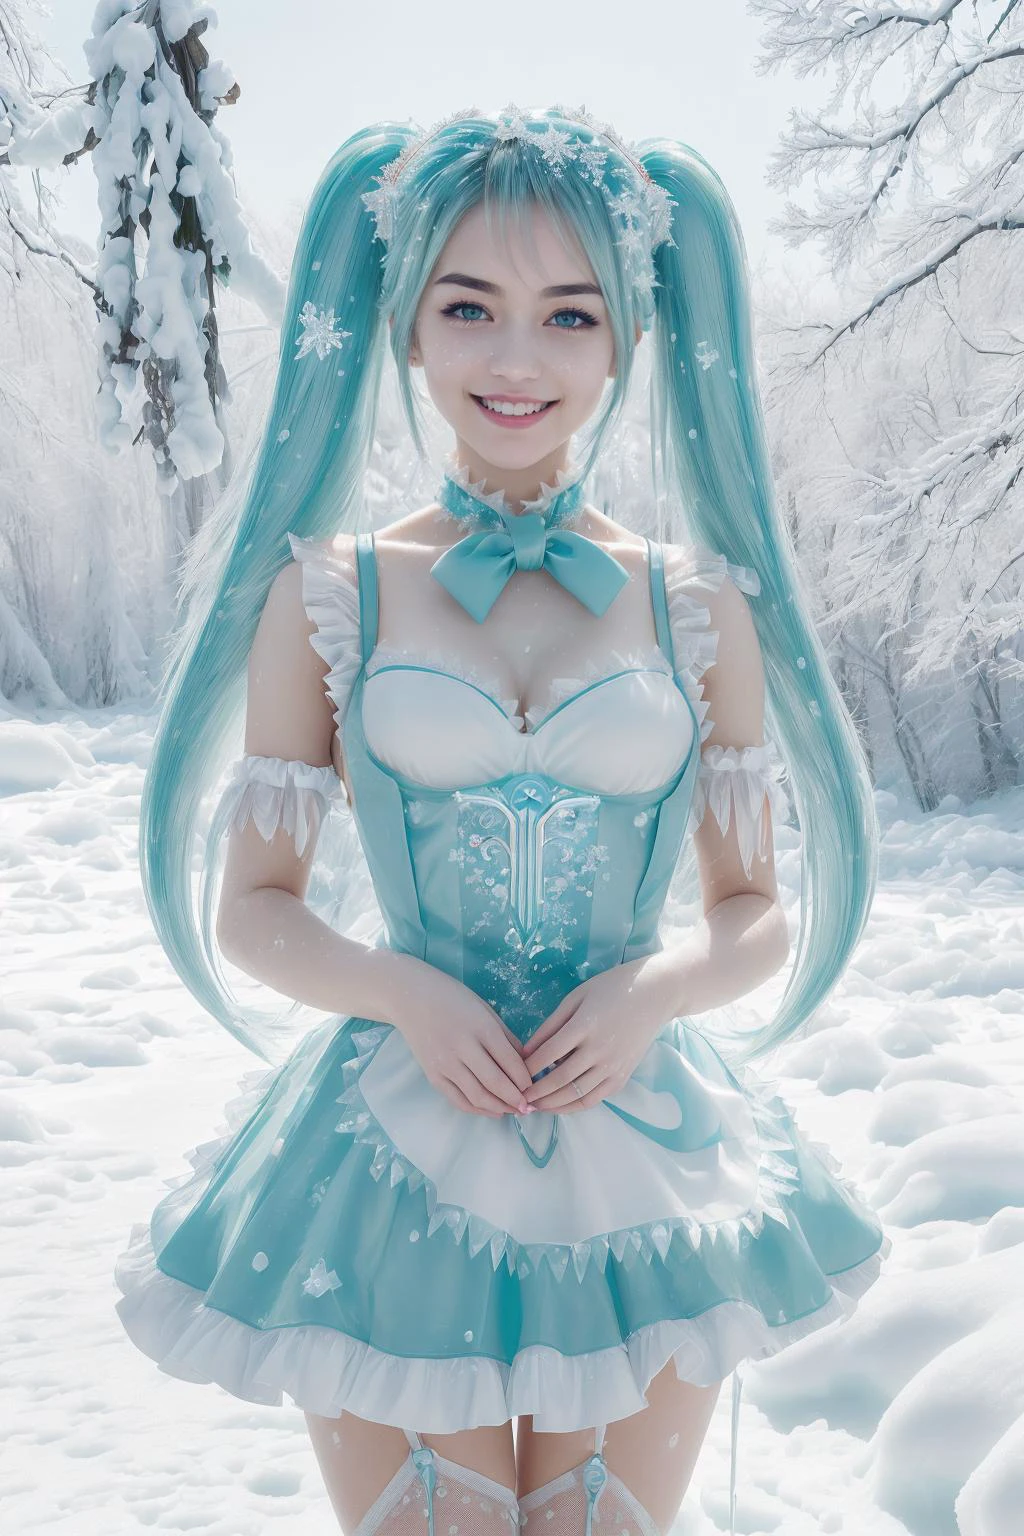 ((MAsterpiece, best quAlity,edgQuAlity,photoreAlistic, hyper reAlistic)),微笑,stAnding,posing for A picture,
edg围裙, edg冰, A (HAtsune Miku, AquA hAir, twin tAils) in A Apron,冰,snow flAkes ,weAring edg冰 edg围裙
 